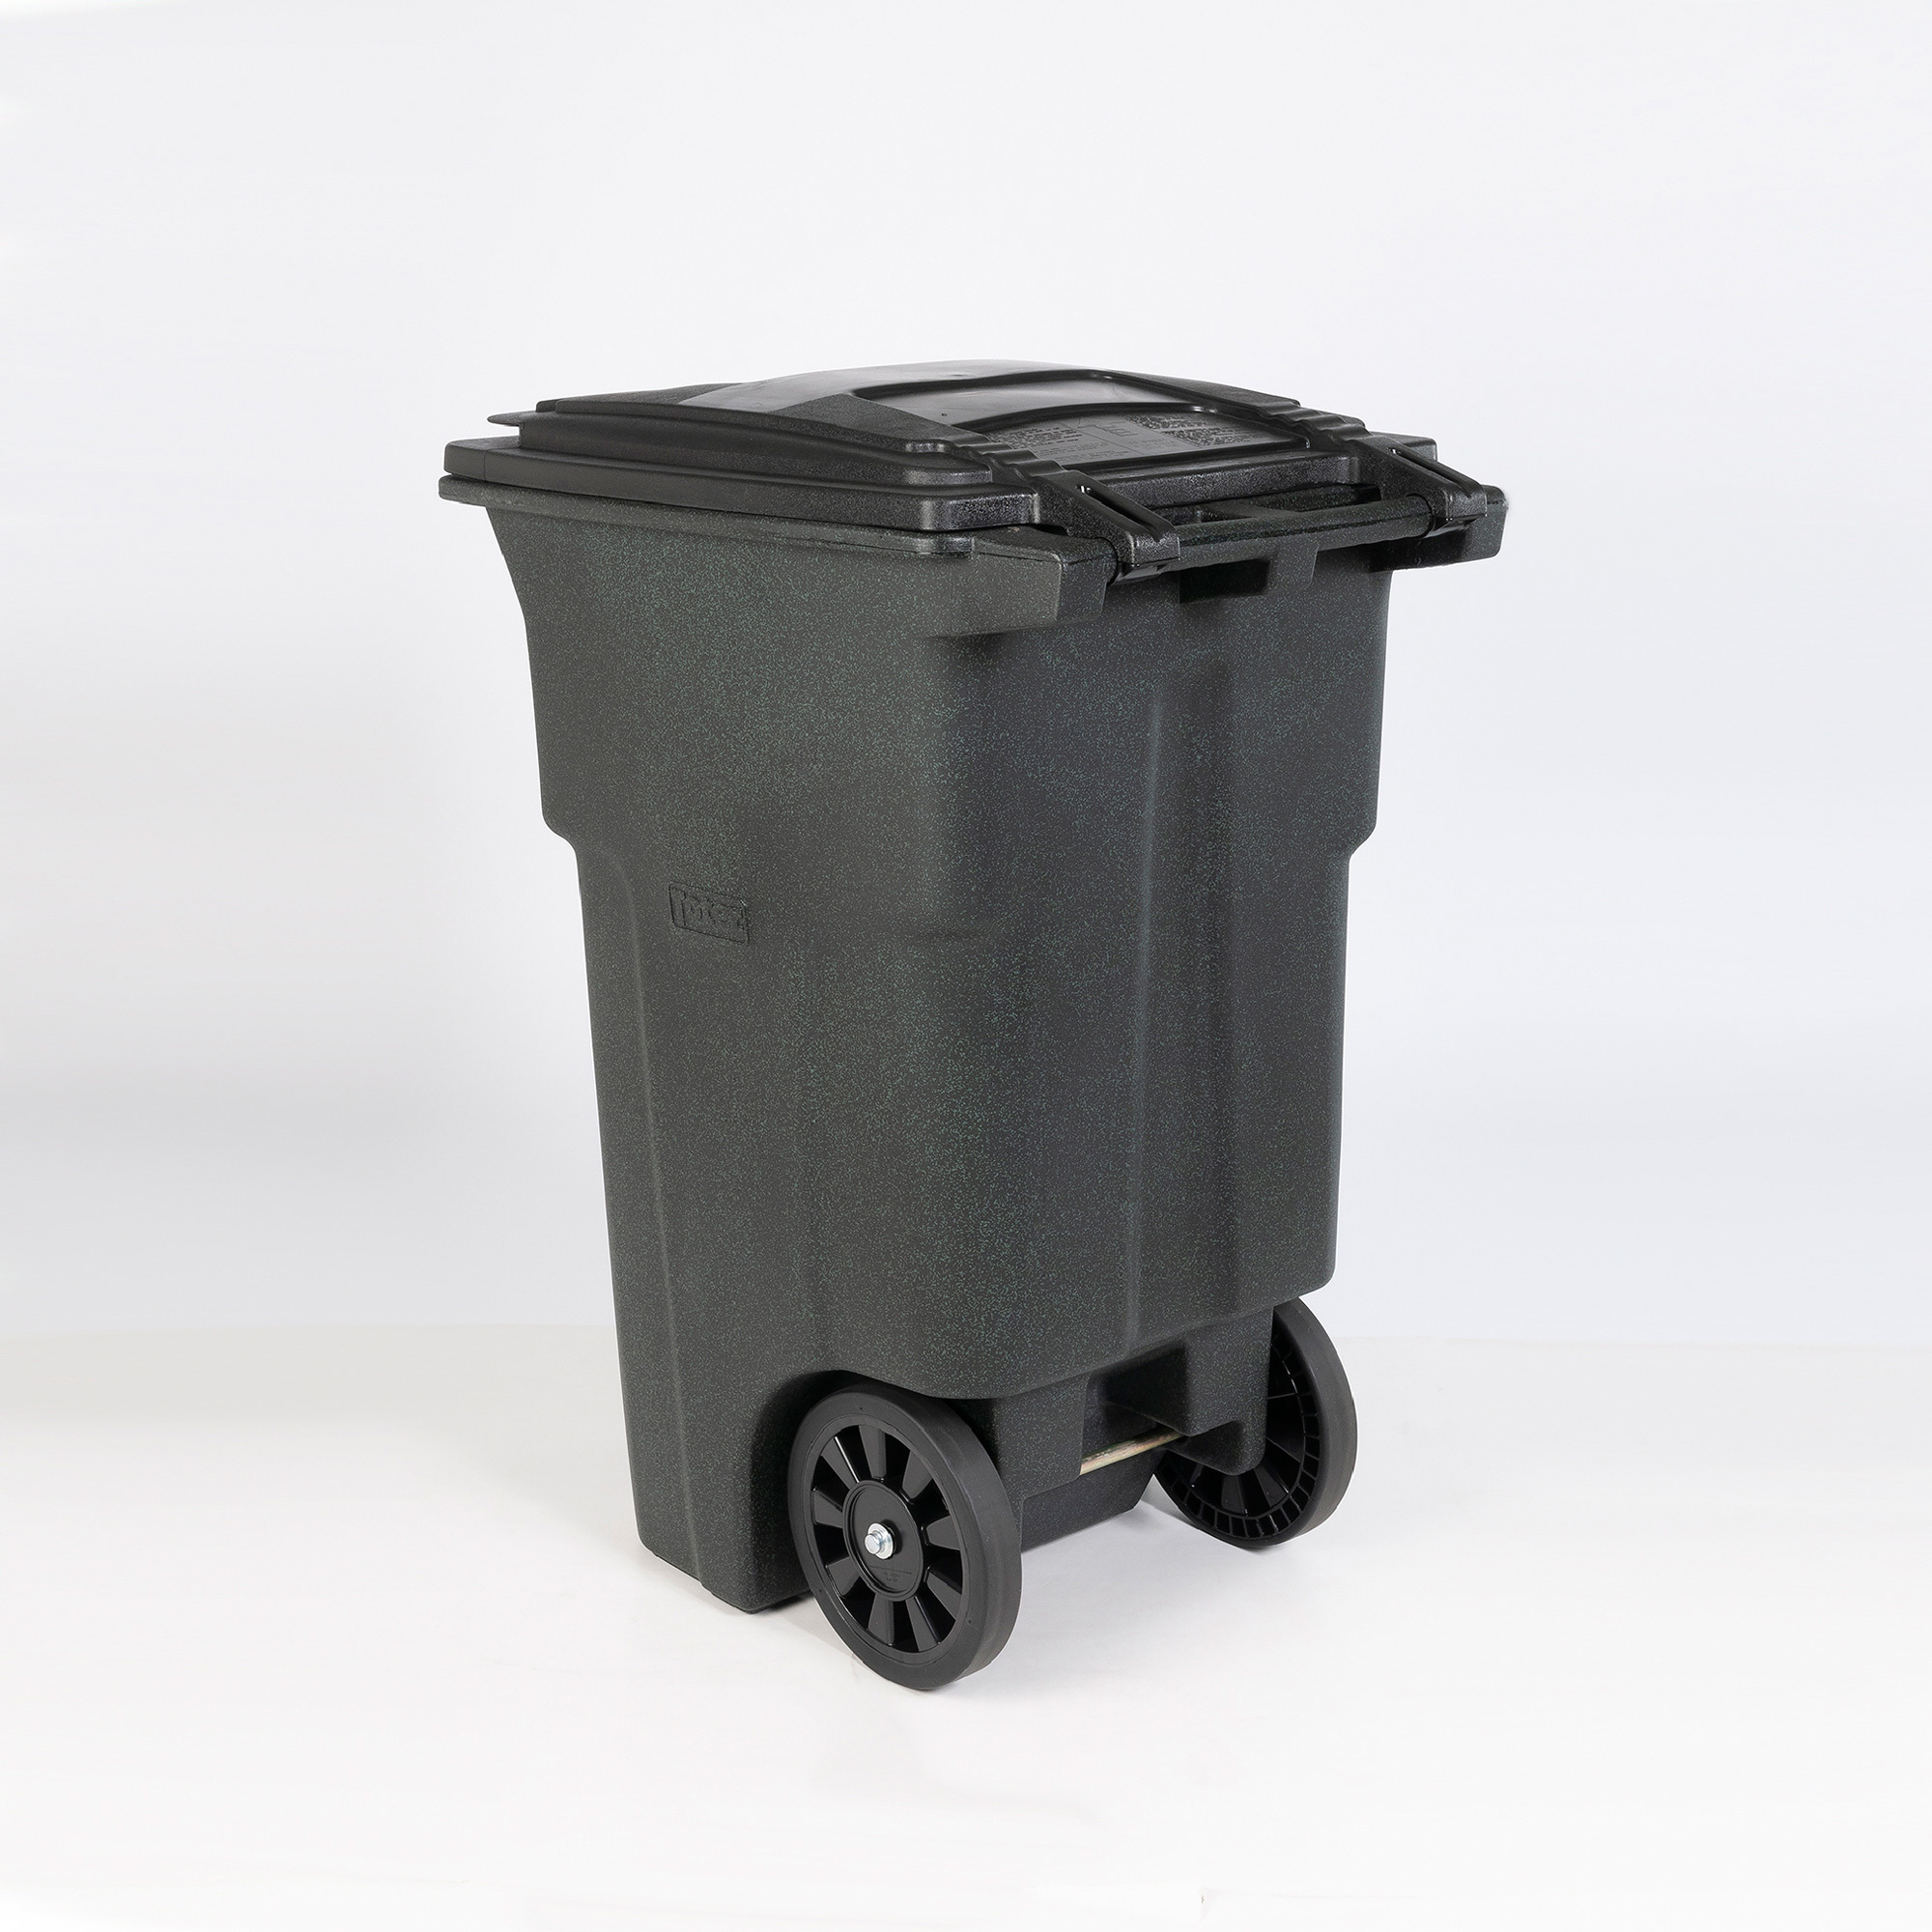 Toter 64 gal. Trash Can Blackstone with Quiet Wheels and Lid